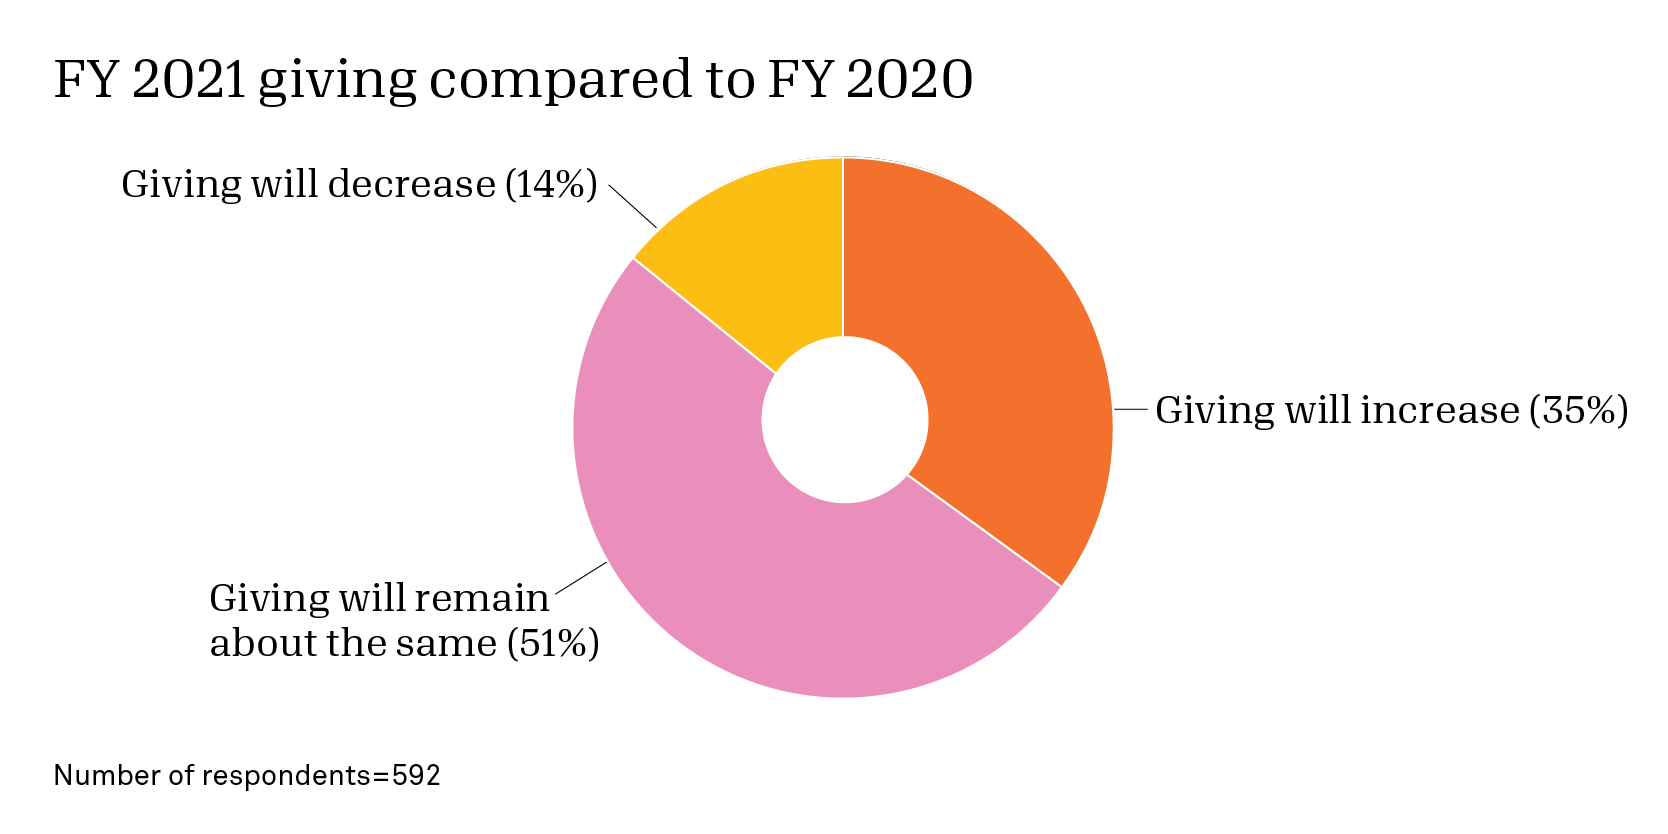 Pie chart of respondents who will decrease giving (14%), increase (35%), stay about the same (51%) in FY 2021 compared to 2020